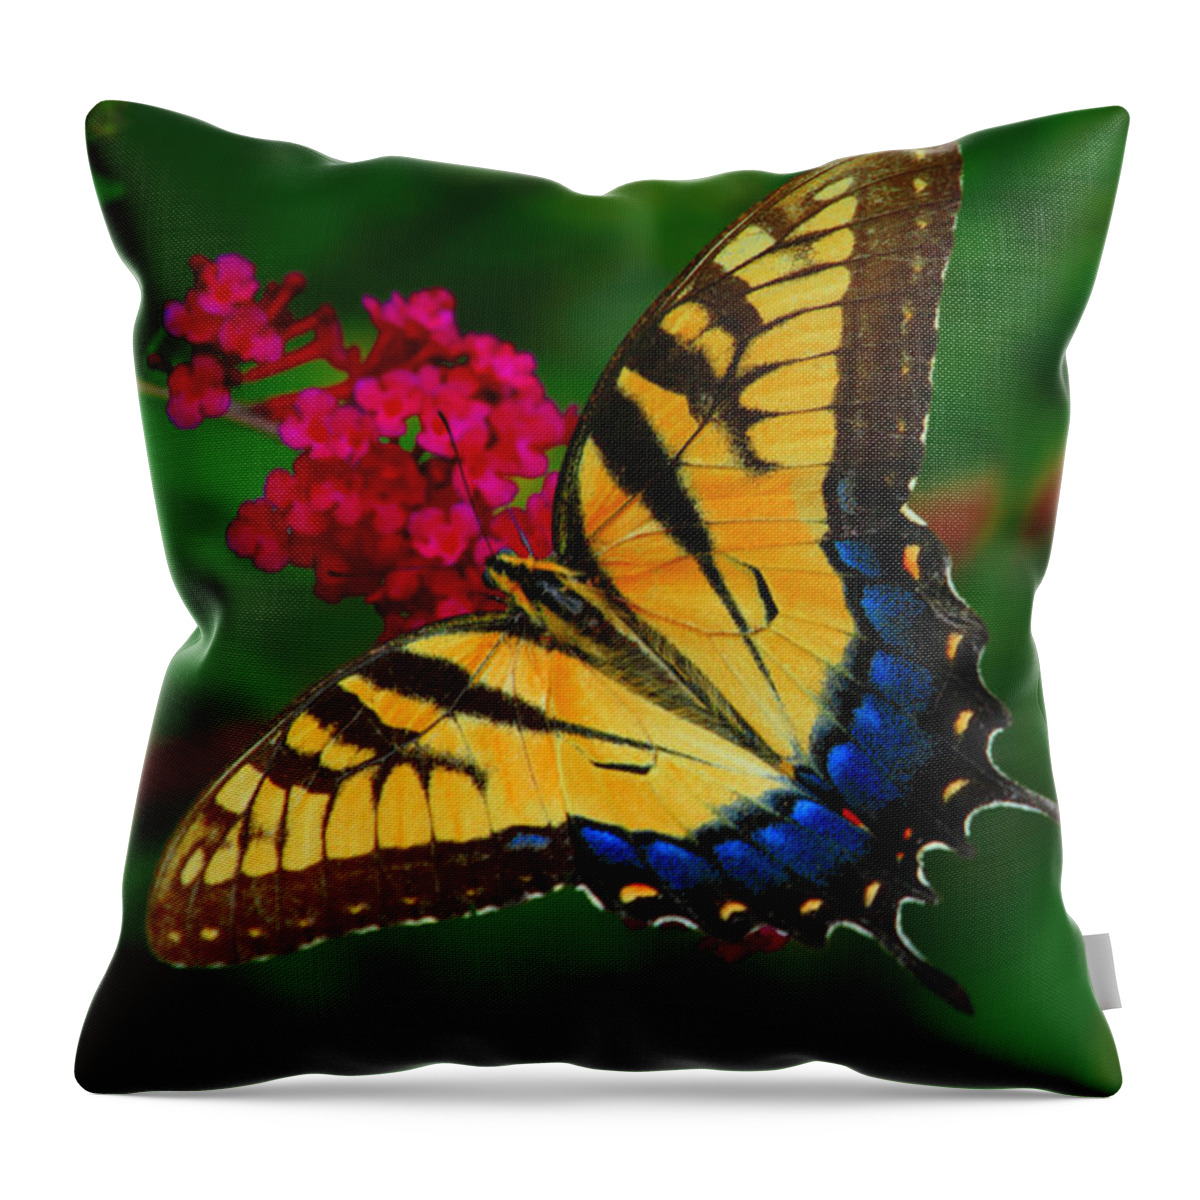 Butterfly Throw Pillow featuring the photograph Butterfly by Geraldine DeBoer